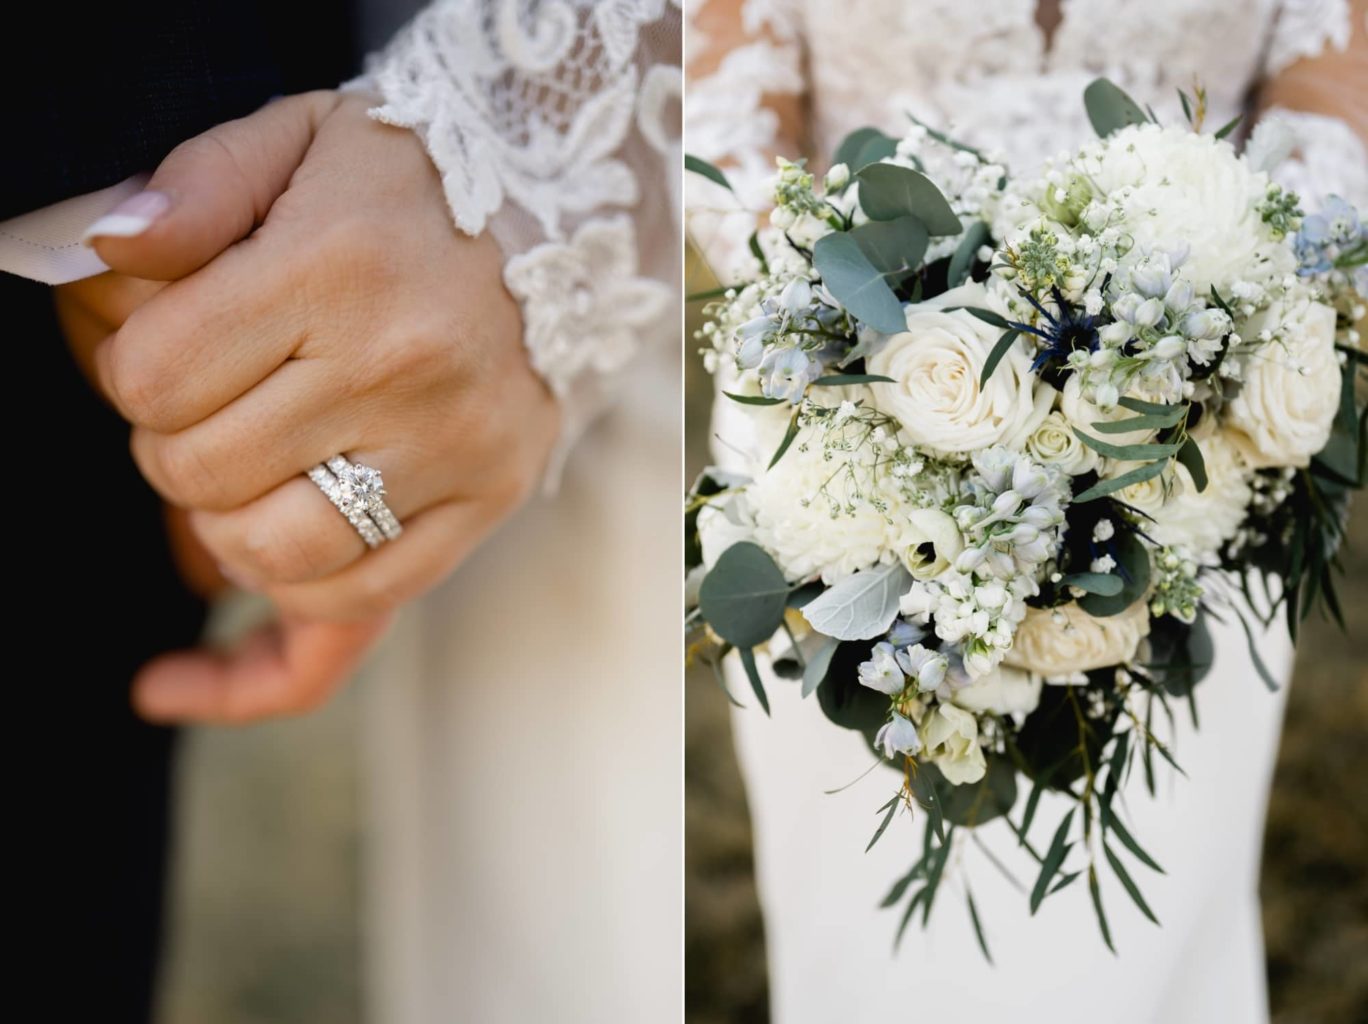 Beautiful wedding ring and bouquet bride and groom in Des Moines Iowa